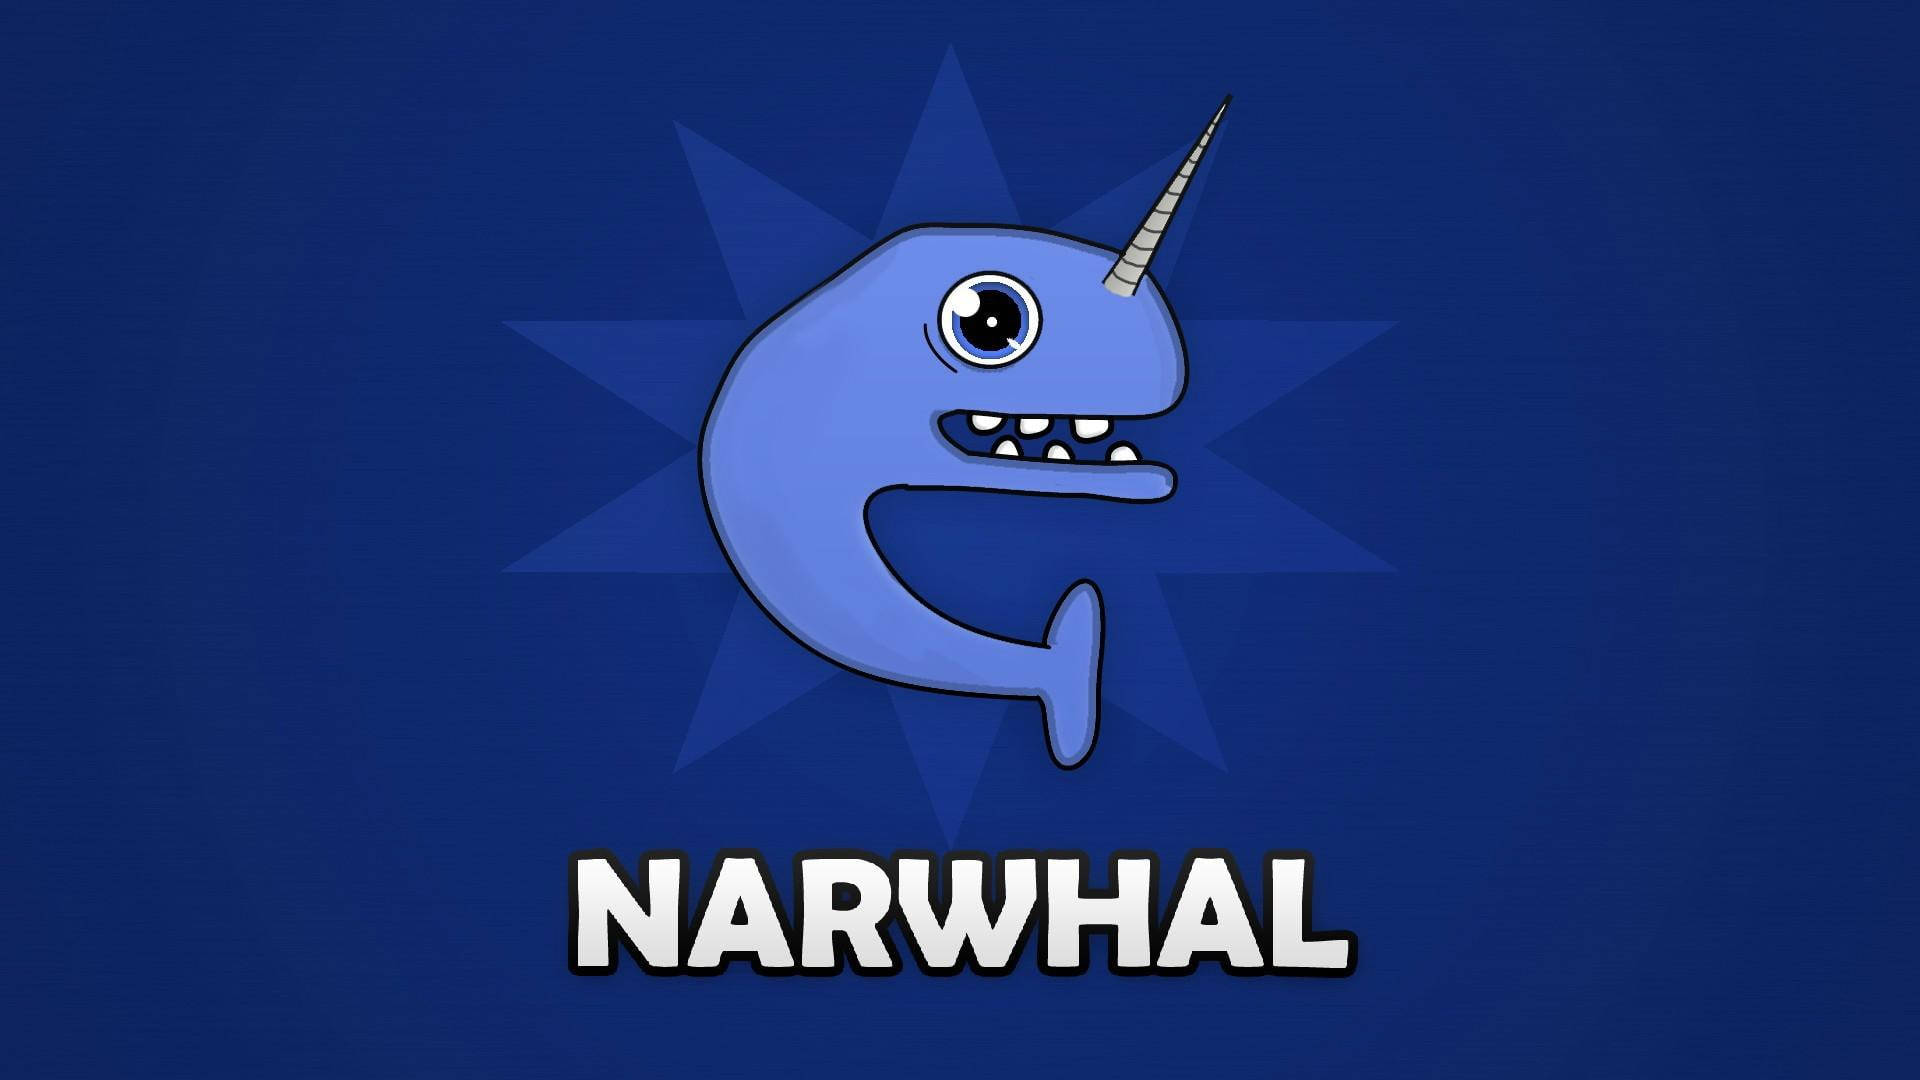 Funny Narwhal Art